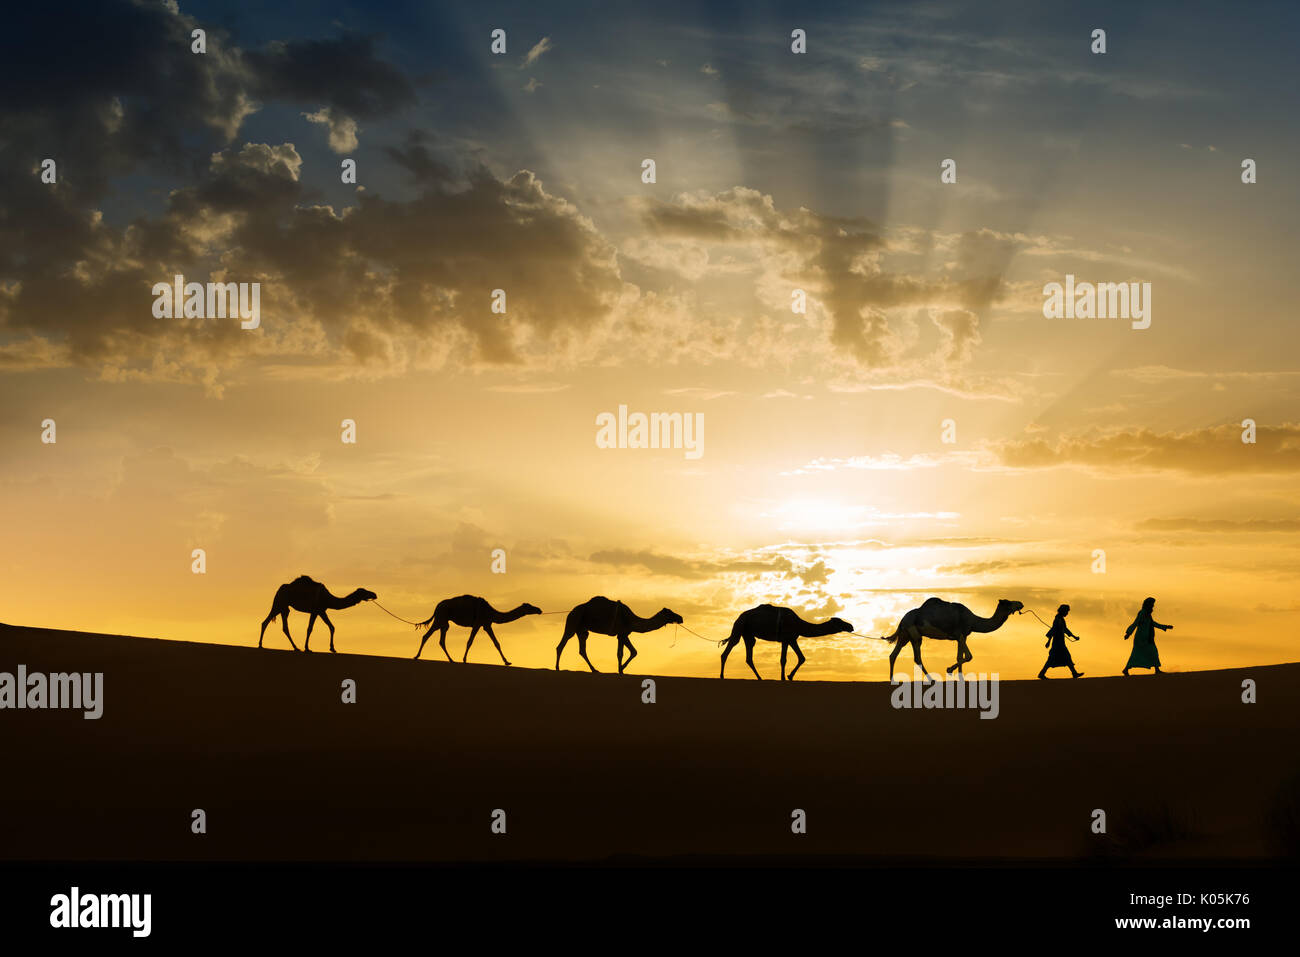 Silhouettes of a camel (dromedary) caravan with nomads in the desert against colorful cloudy sky at sunrise. Stock Photo